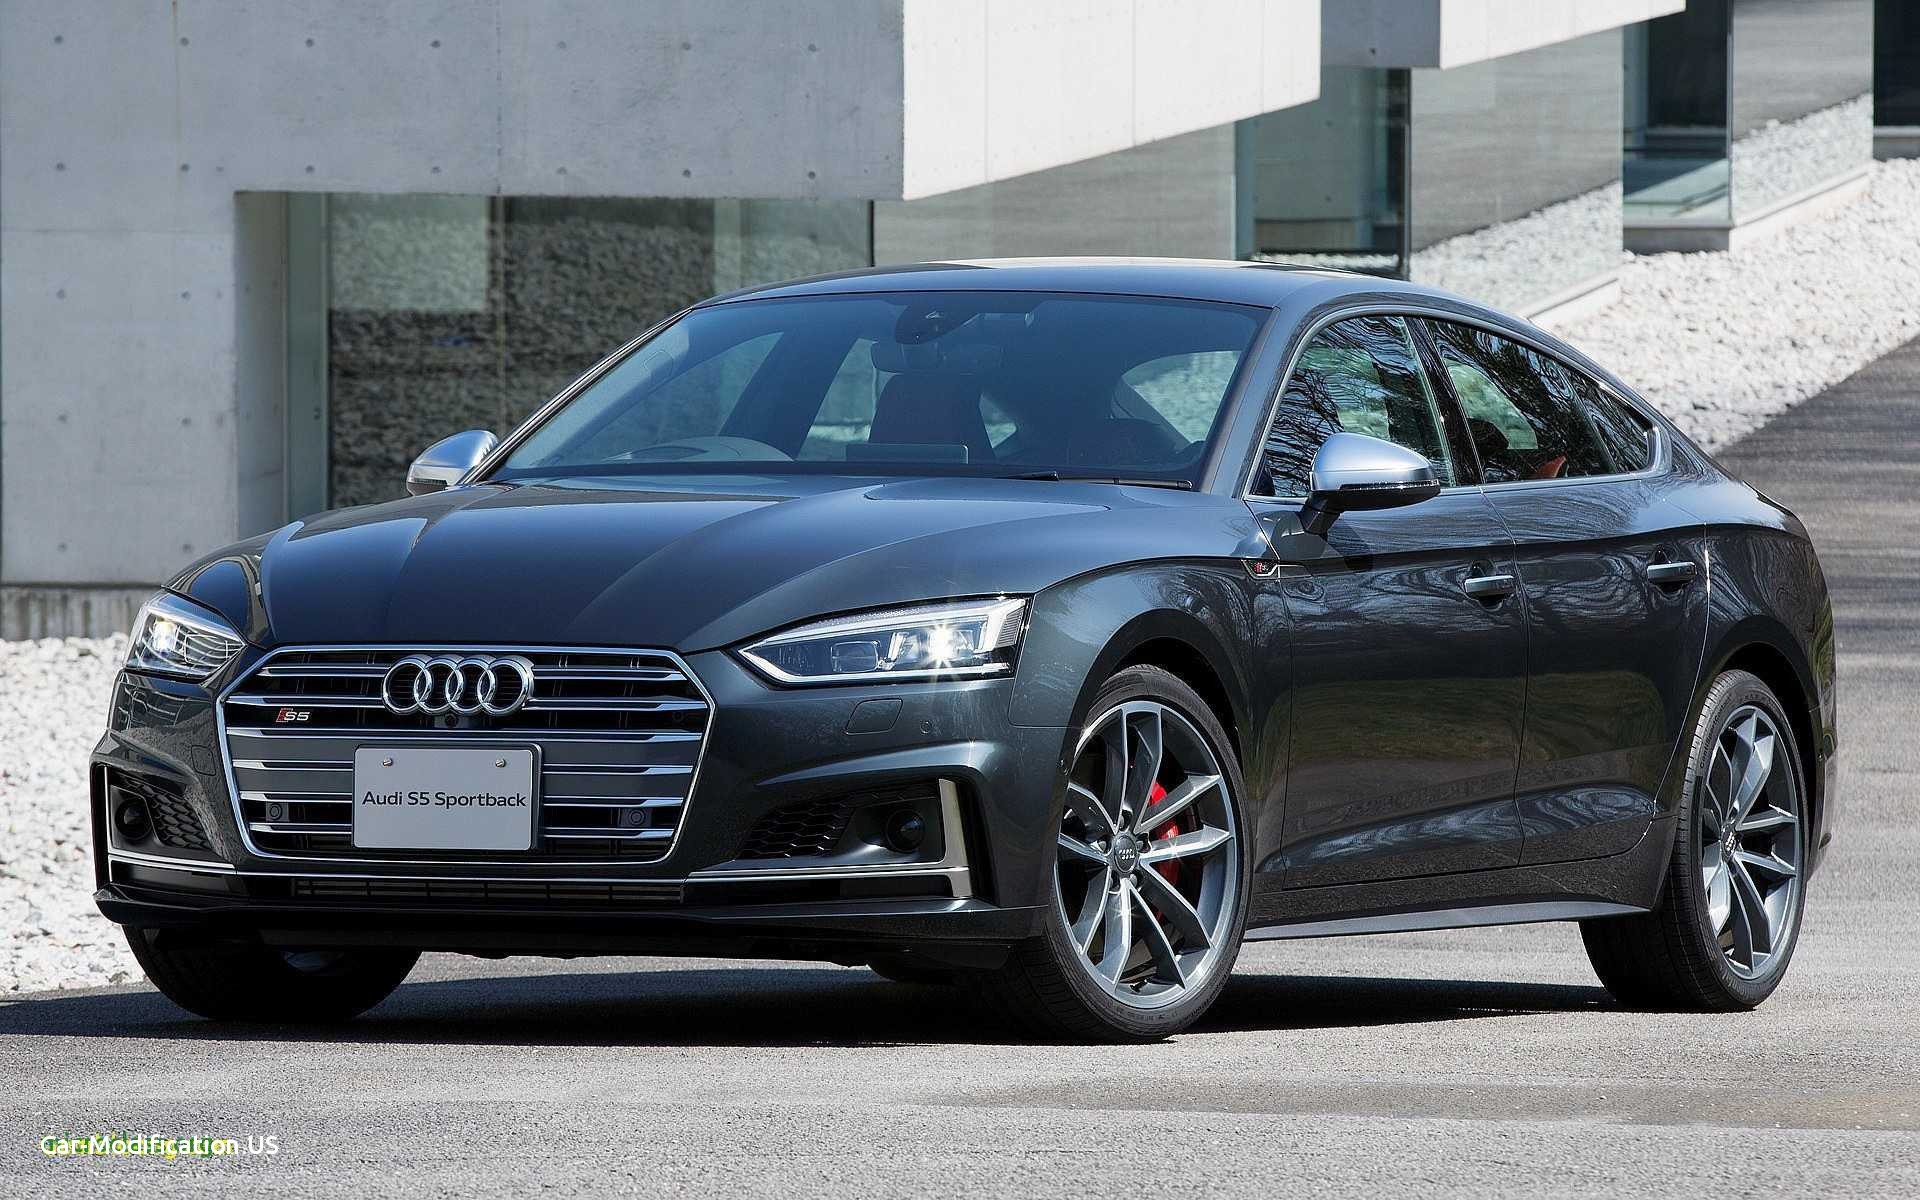 2019 cars new 2019 vehicles 2019 cars audi a6 awesome audi a6 2019